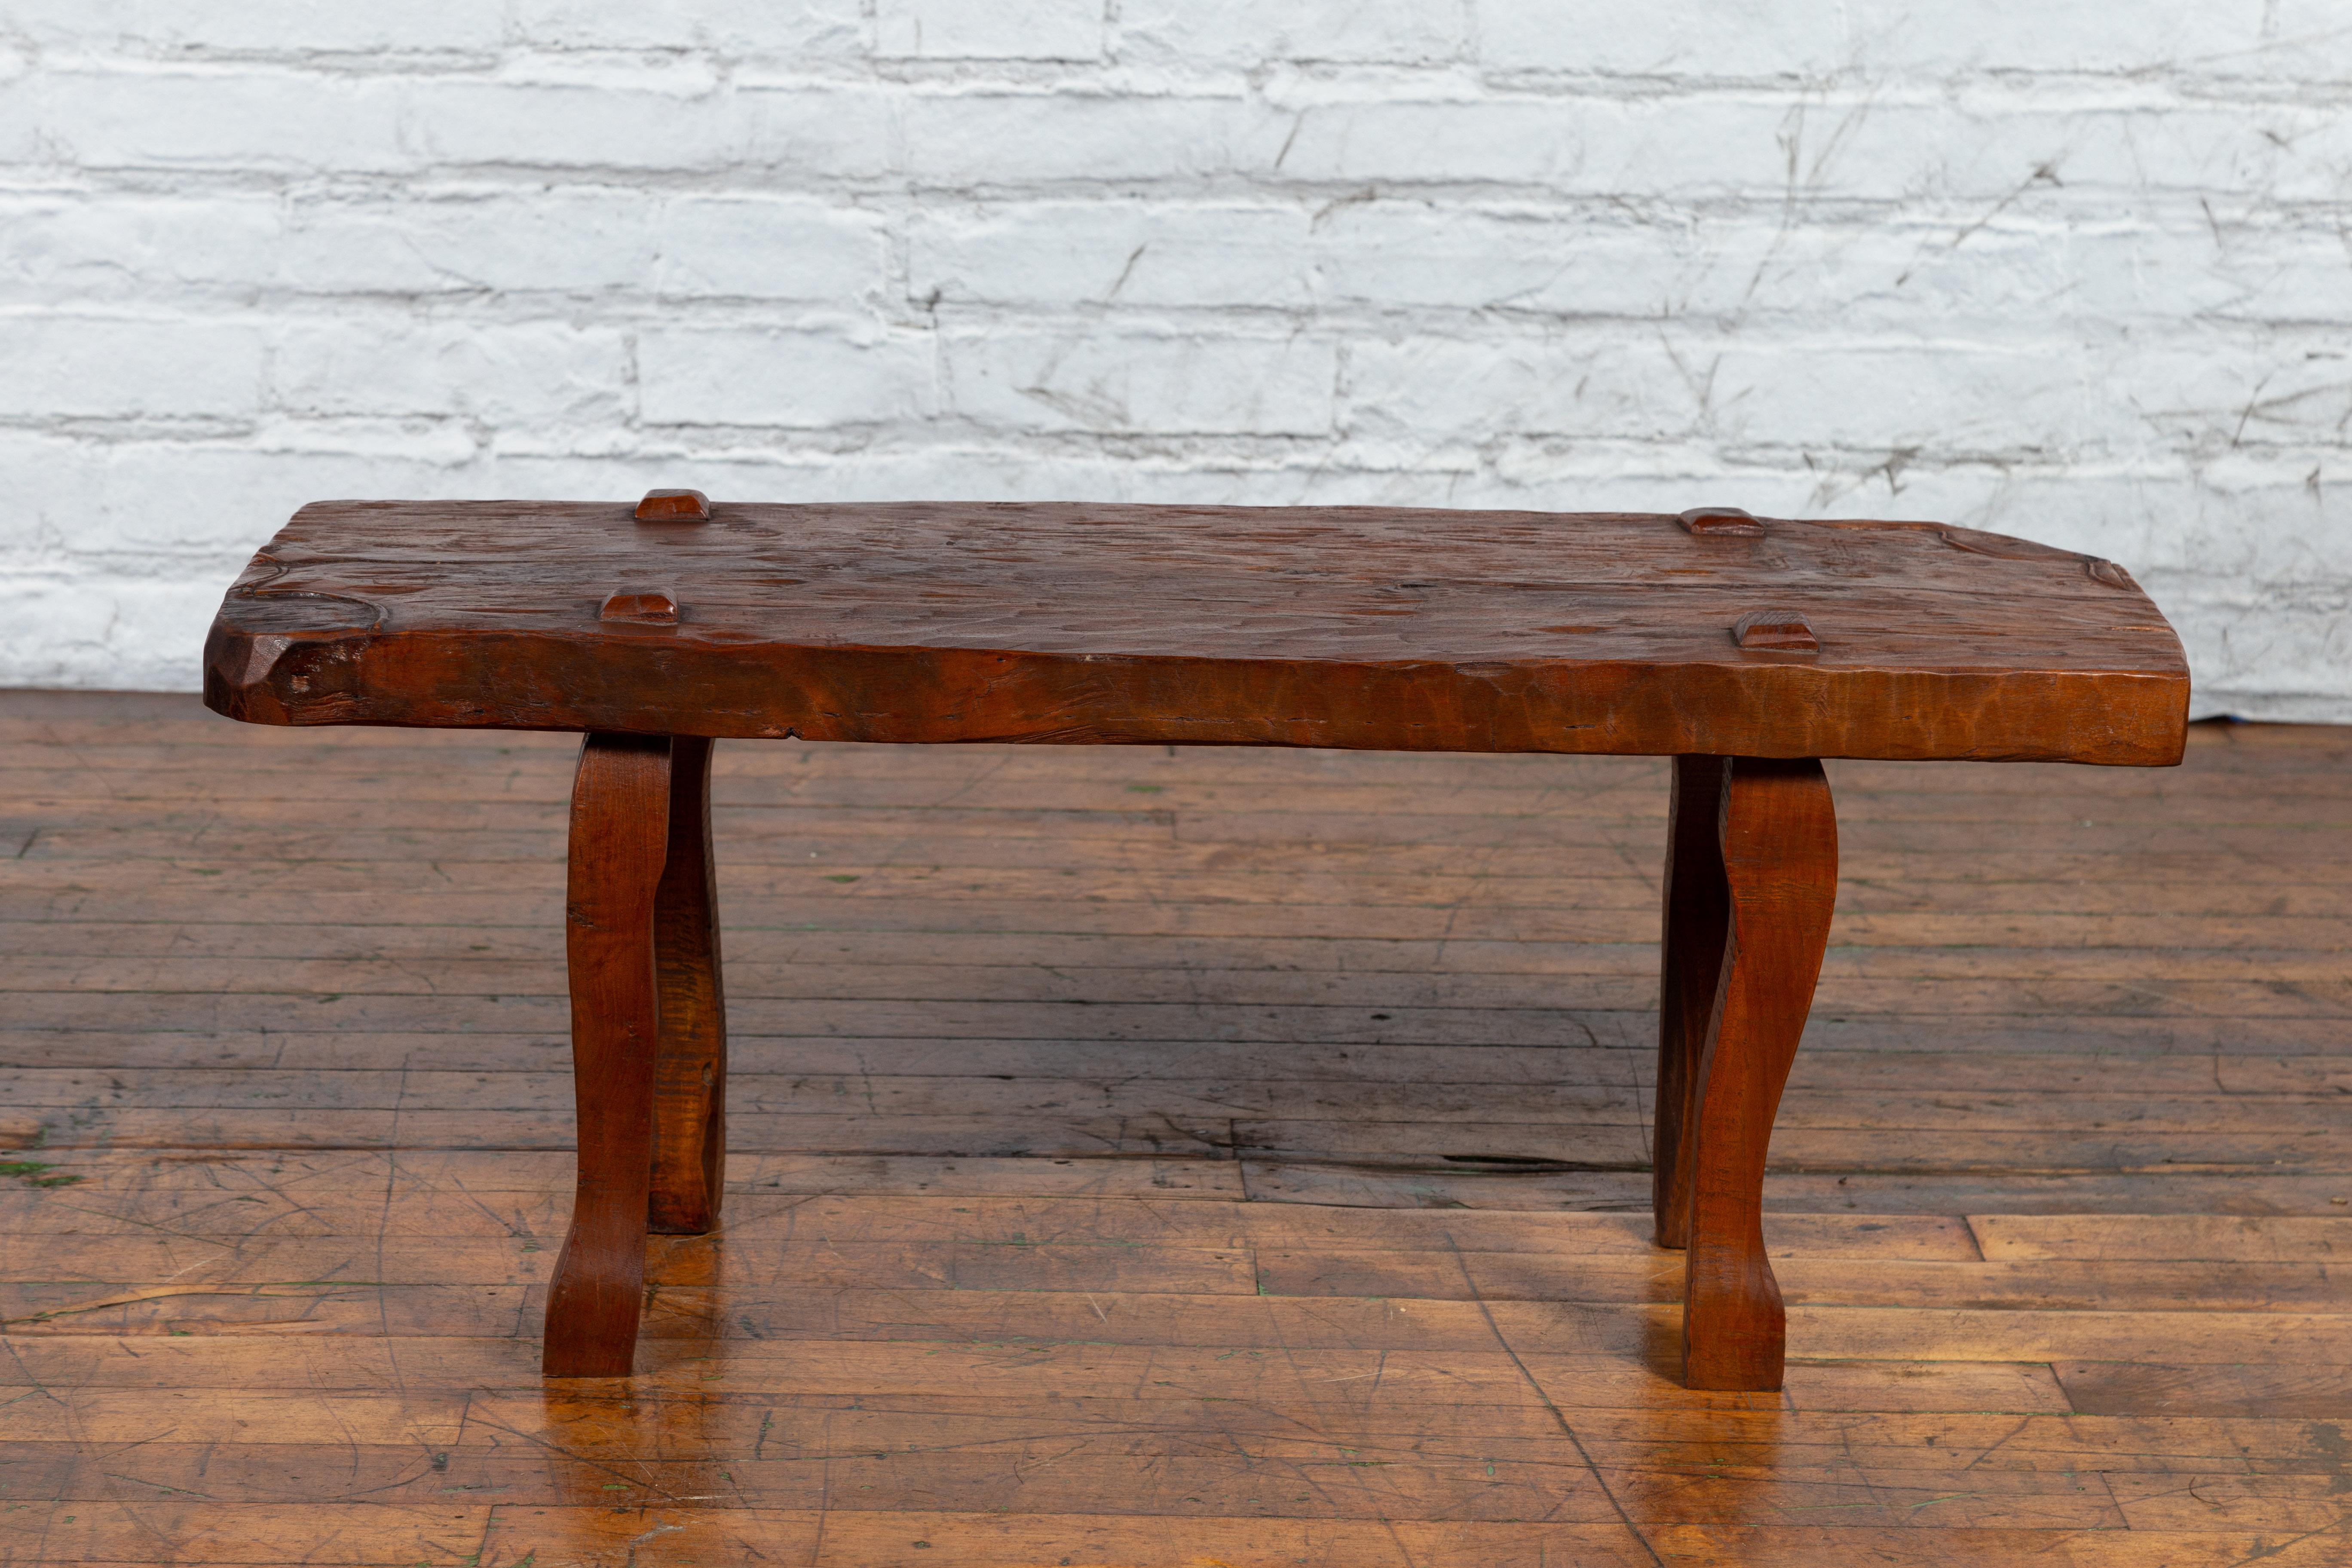 Javanese Arts & Crafts Teak Table with Recessed Legs and Distressed Appearance 5